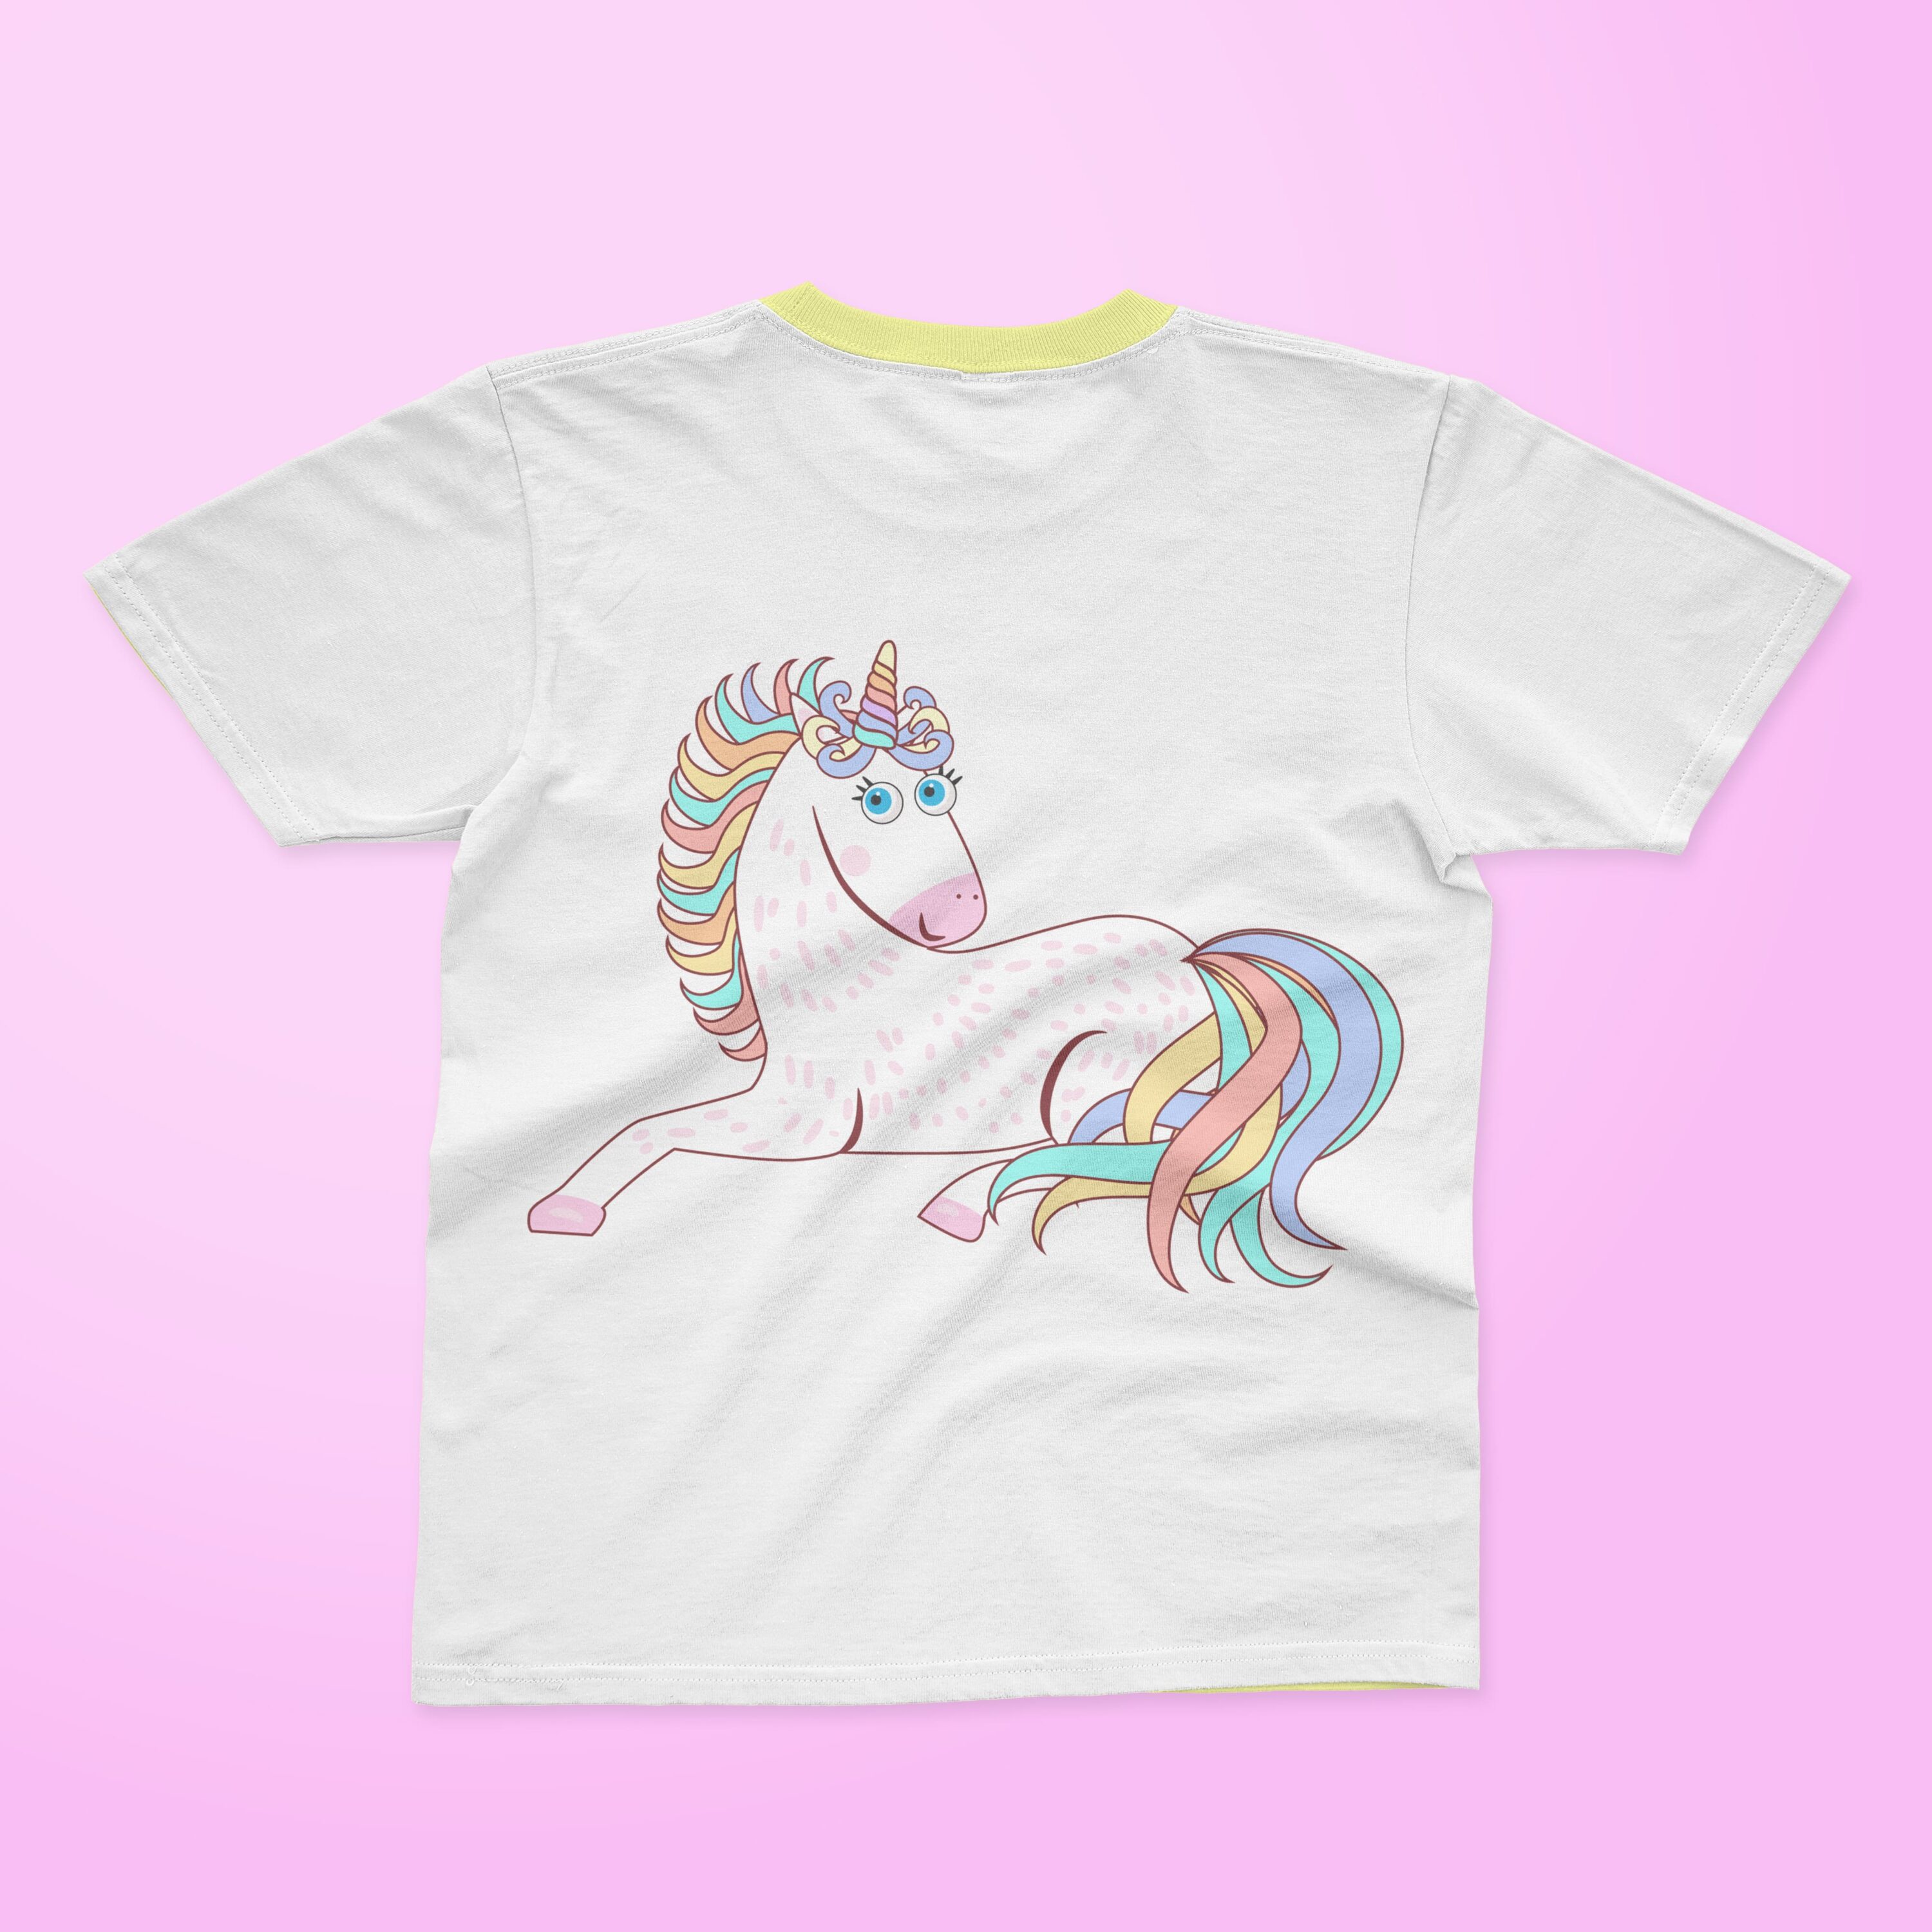 White t-shirt with a yellow collar and a cute lying unicorn on a pink background.